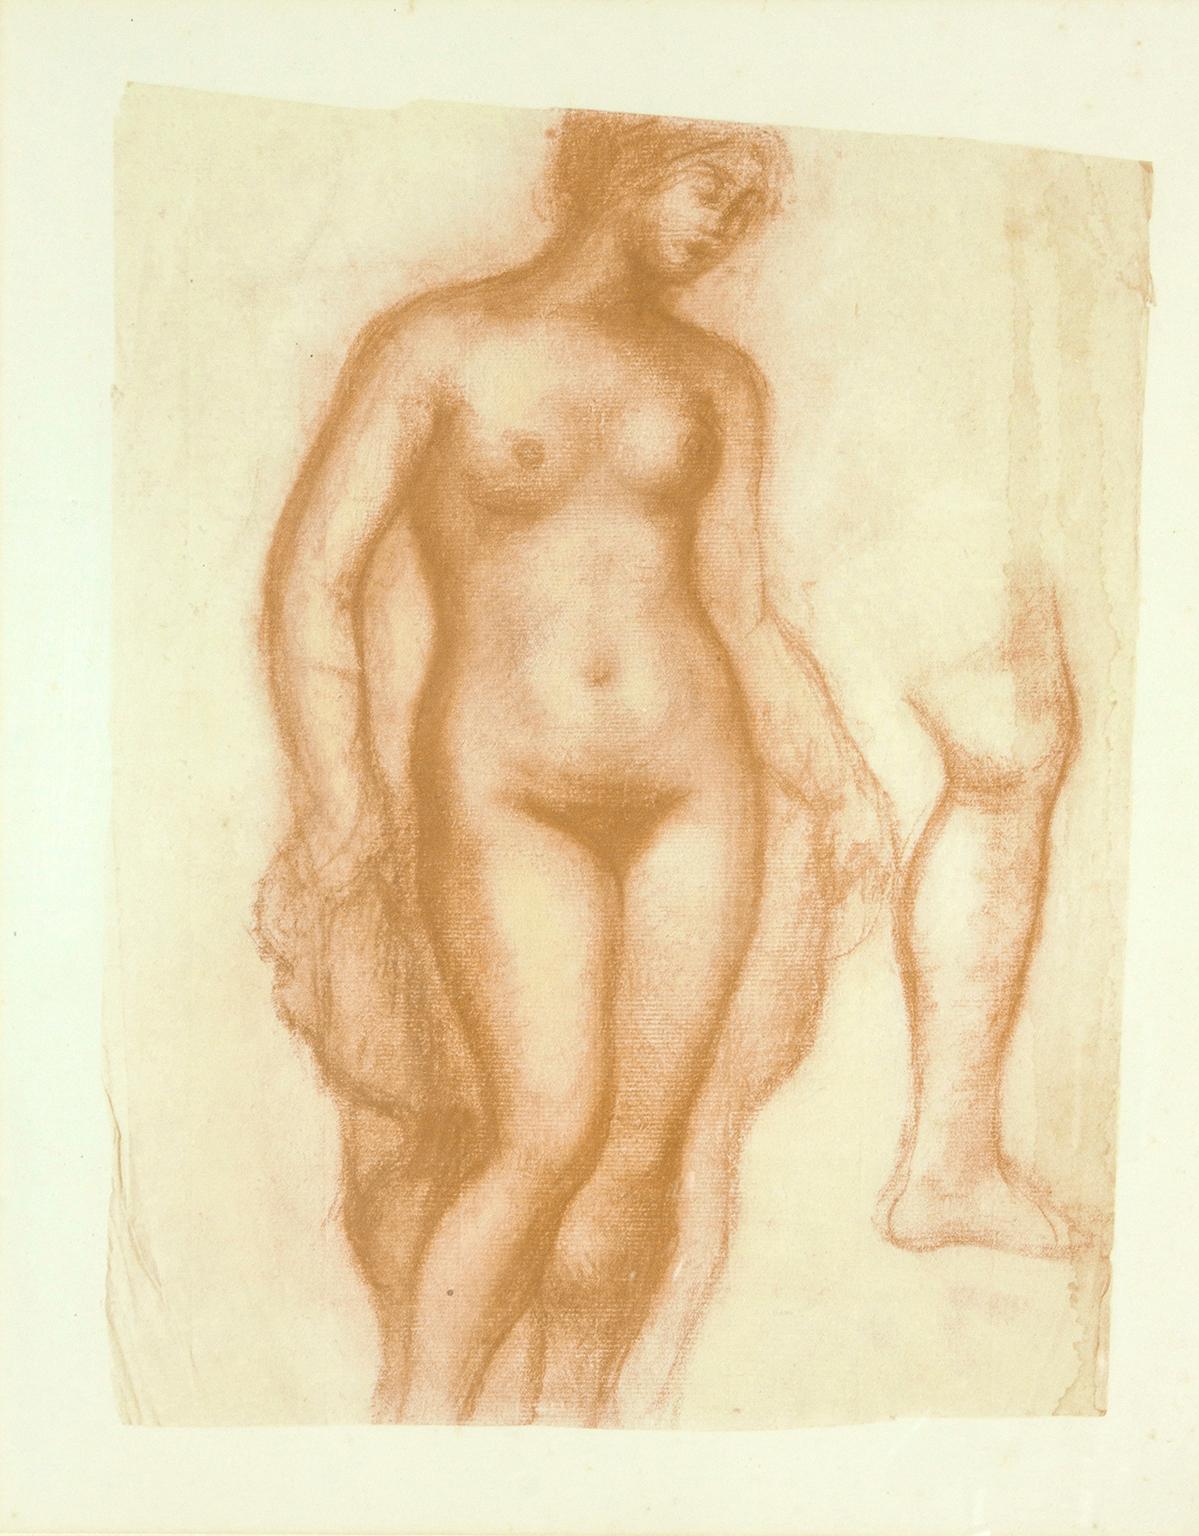 Framed lithograph of a female nude pastel by artist Aristide Maillol. Image size: 12 1/2 x 9 1/2 inches. Framed under glass in wooden frame.